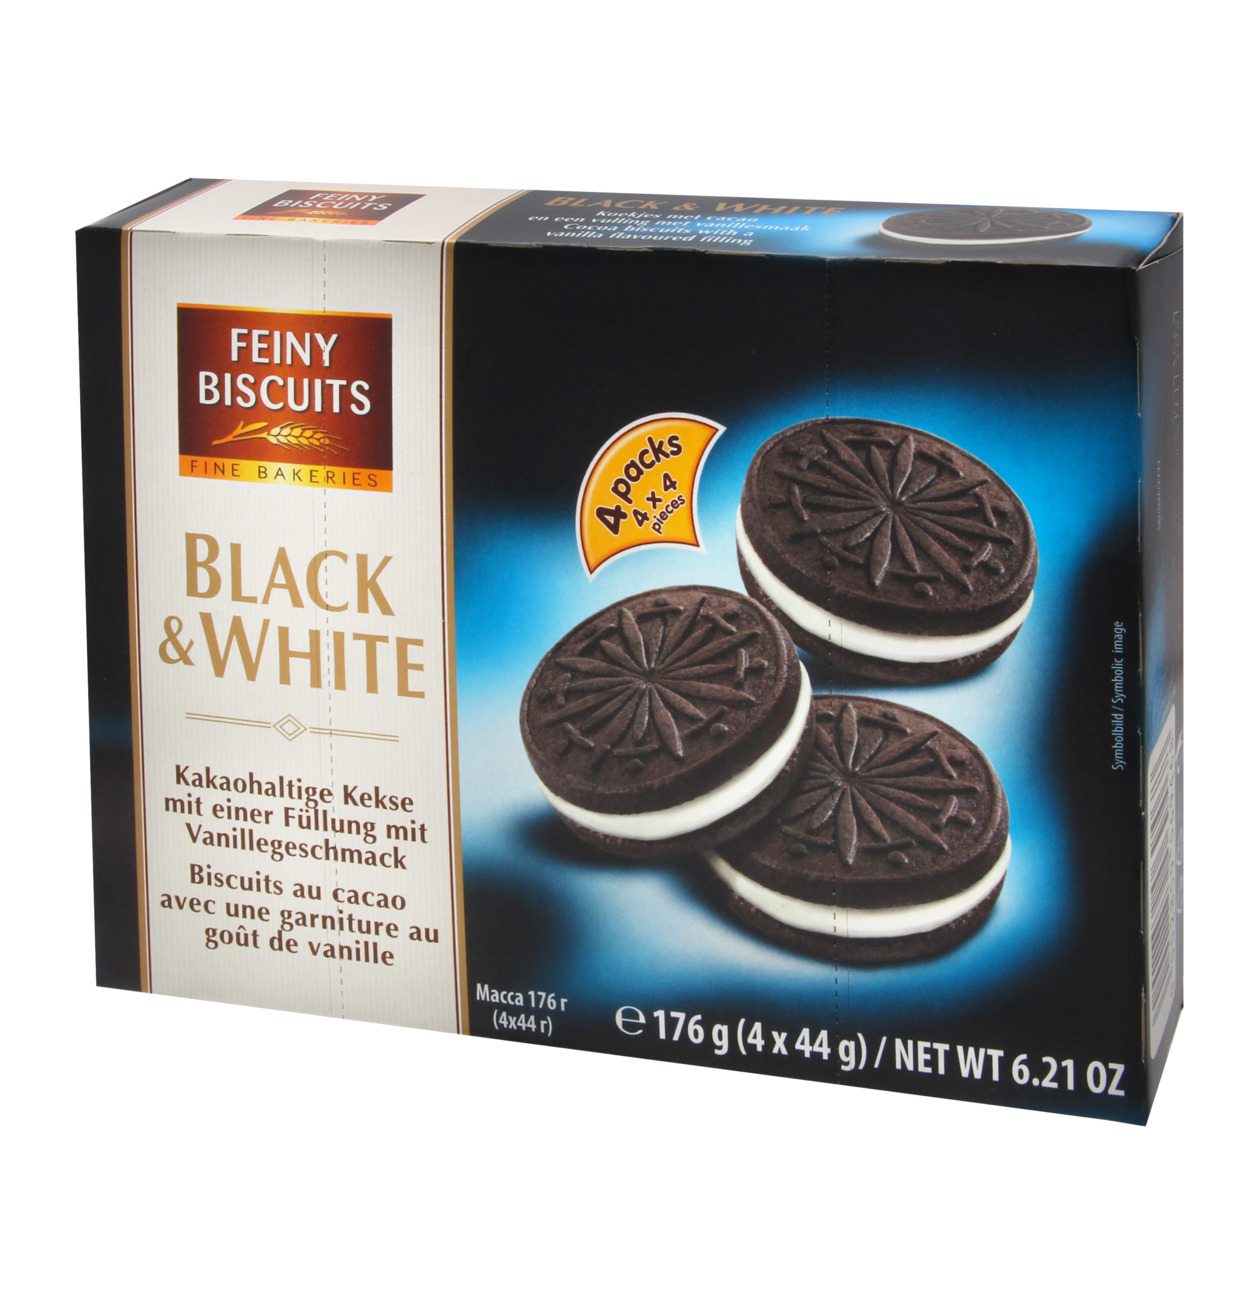 Feiny Biscuits Cookies Black & White 176g